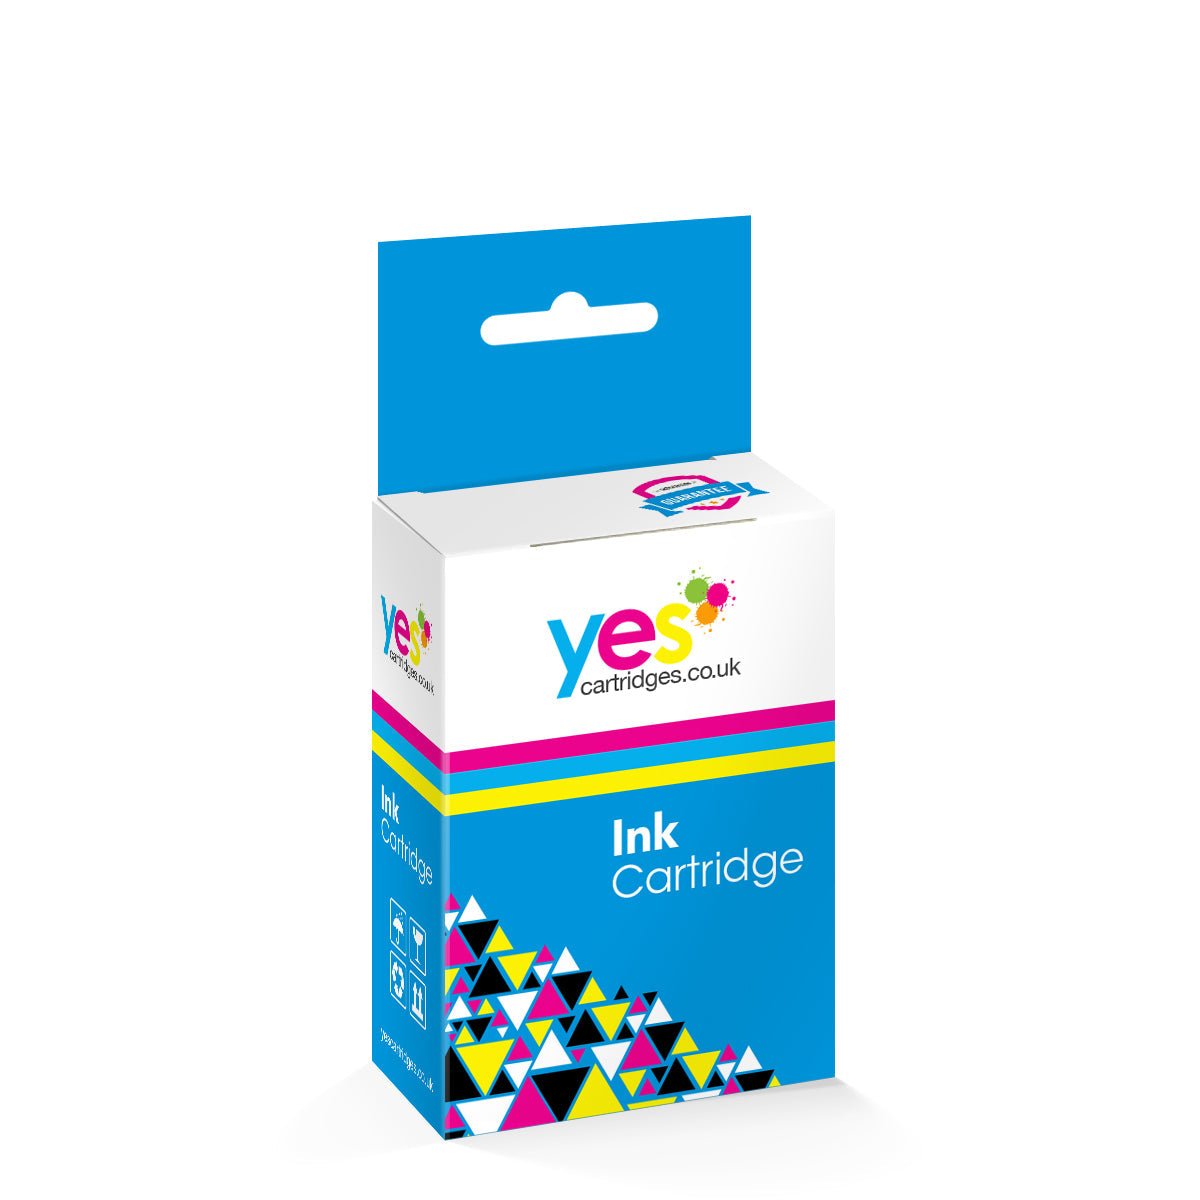 Compatible 56 HP C6656A Black Ink Cartridge - Yes Cartridges